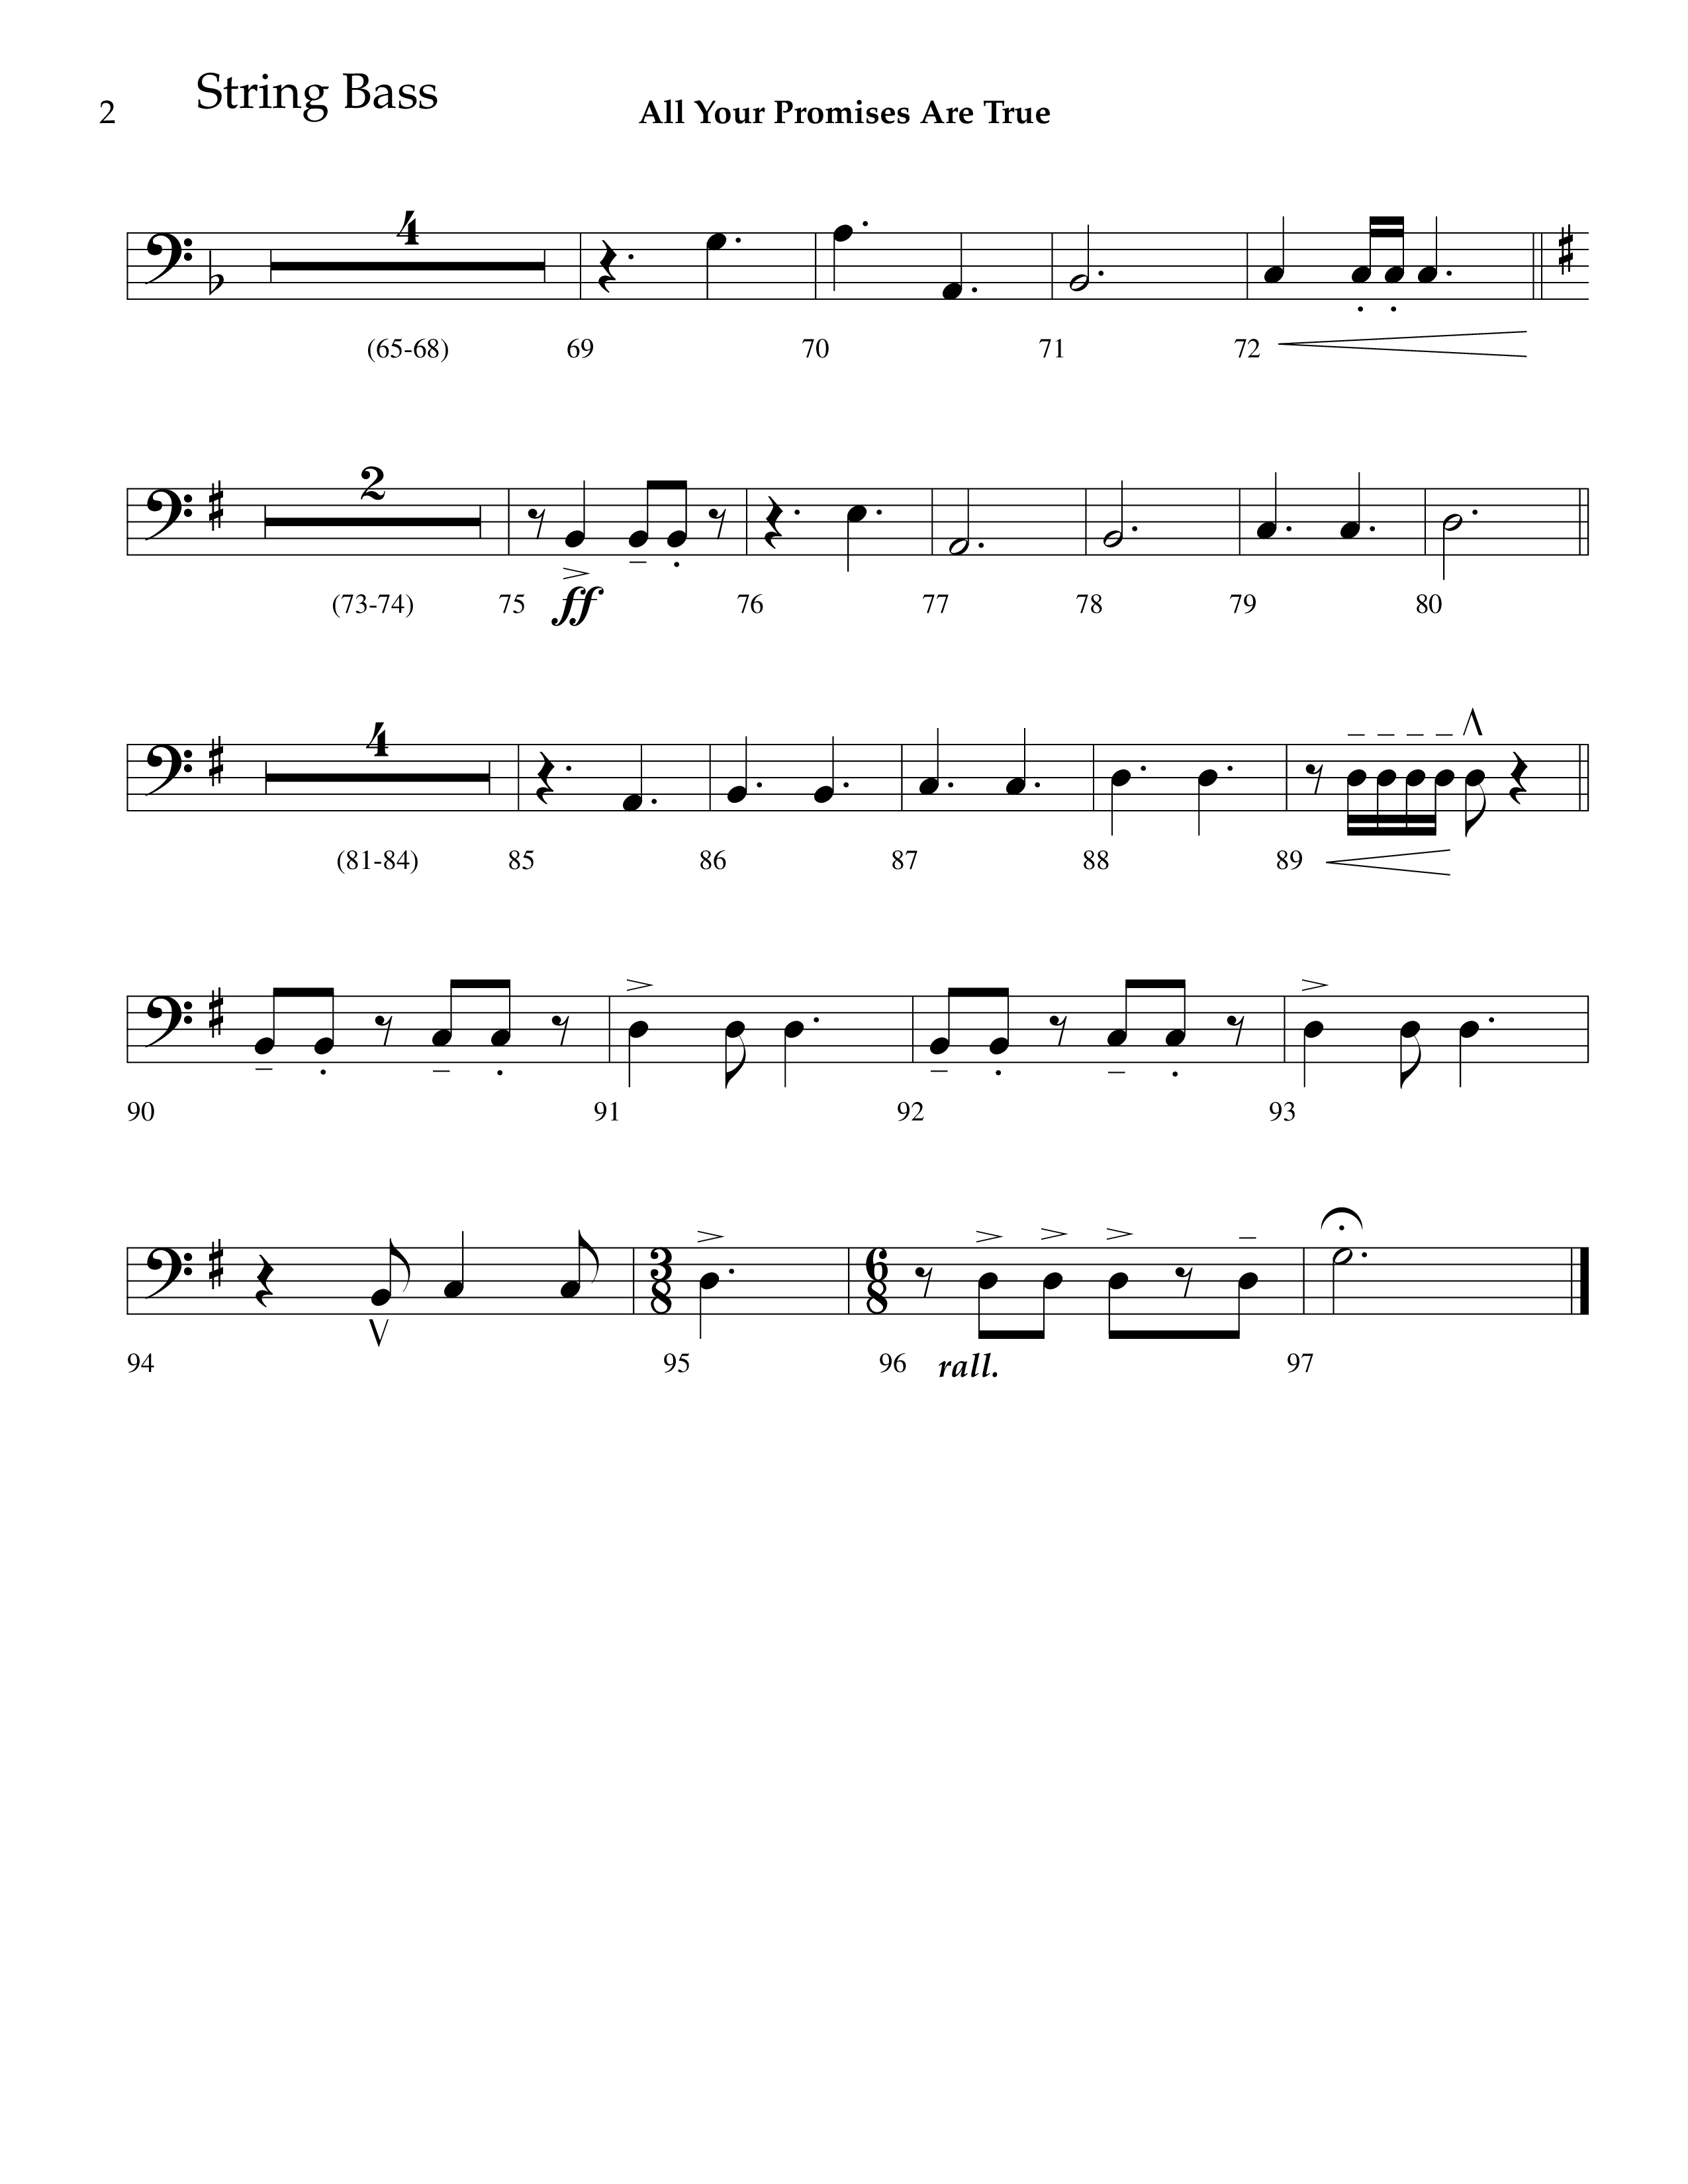 All Your Promises Are True (Choral Anthem SATB) String Bass (Lifeway Choral / Arr. J. Daniel Smith)